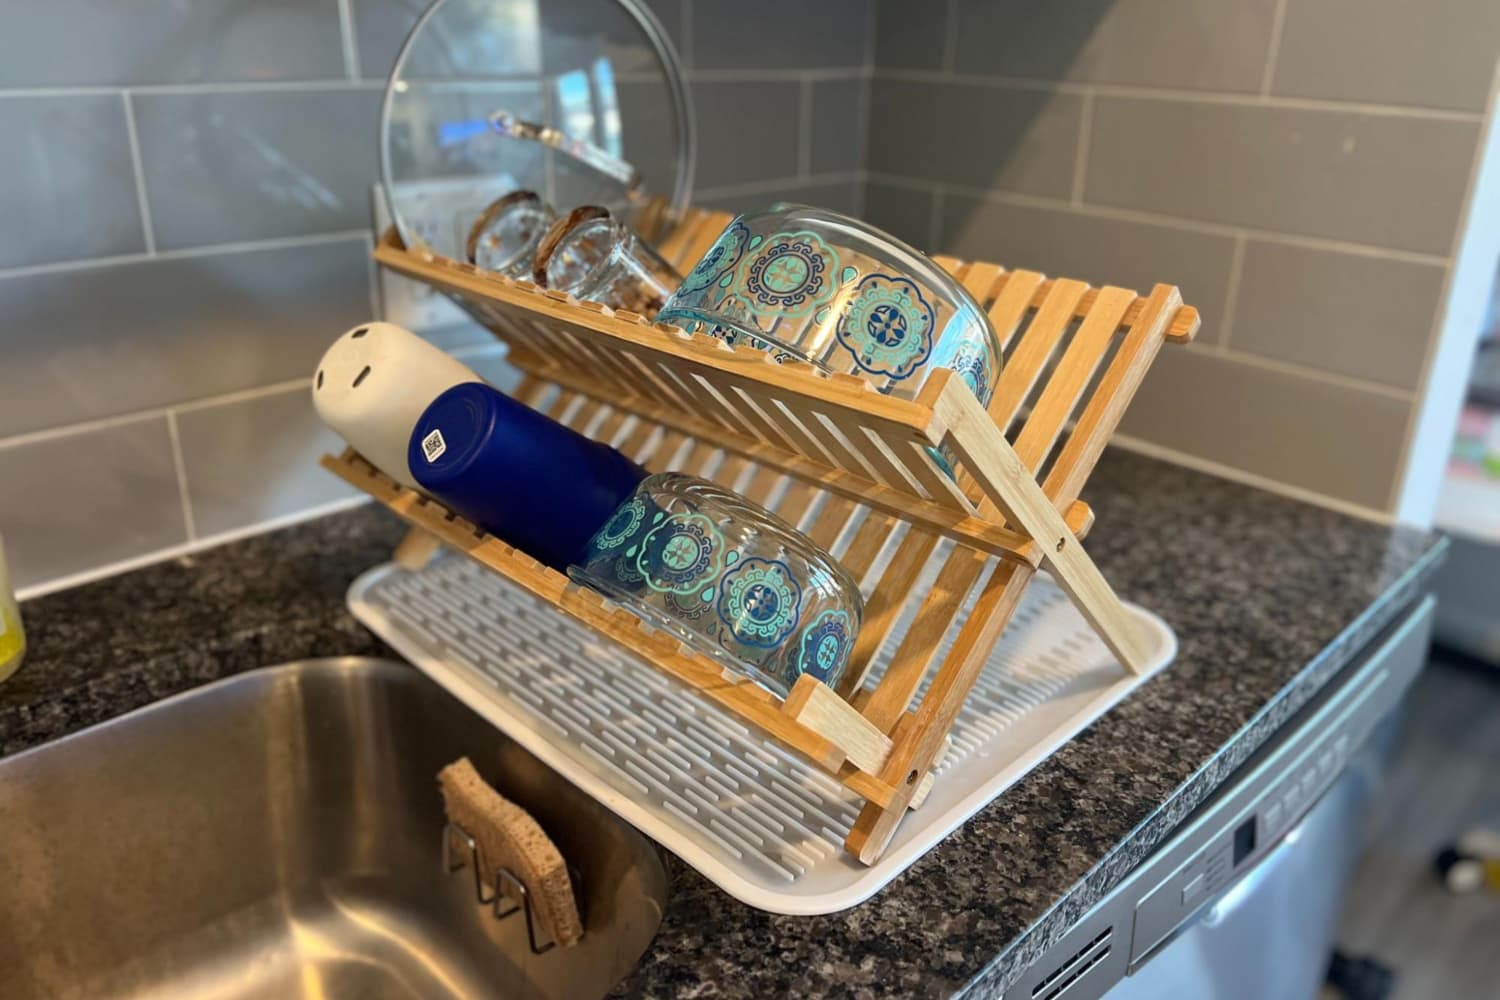 https://cdn.apartmenttherapy.info/image/upload/f_auto,q_auto:eco,c_fill,g_auto,w_1500,ar_3:2/k%2Fshopping%2F2023-09%2Fbamboo-dish-rack%2Fbamboo-drying-rack-3